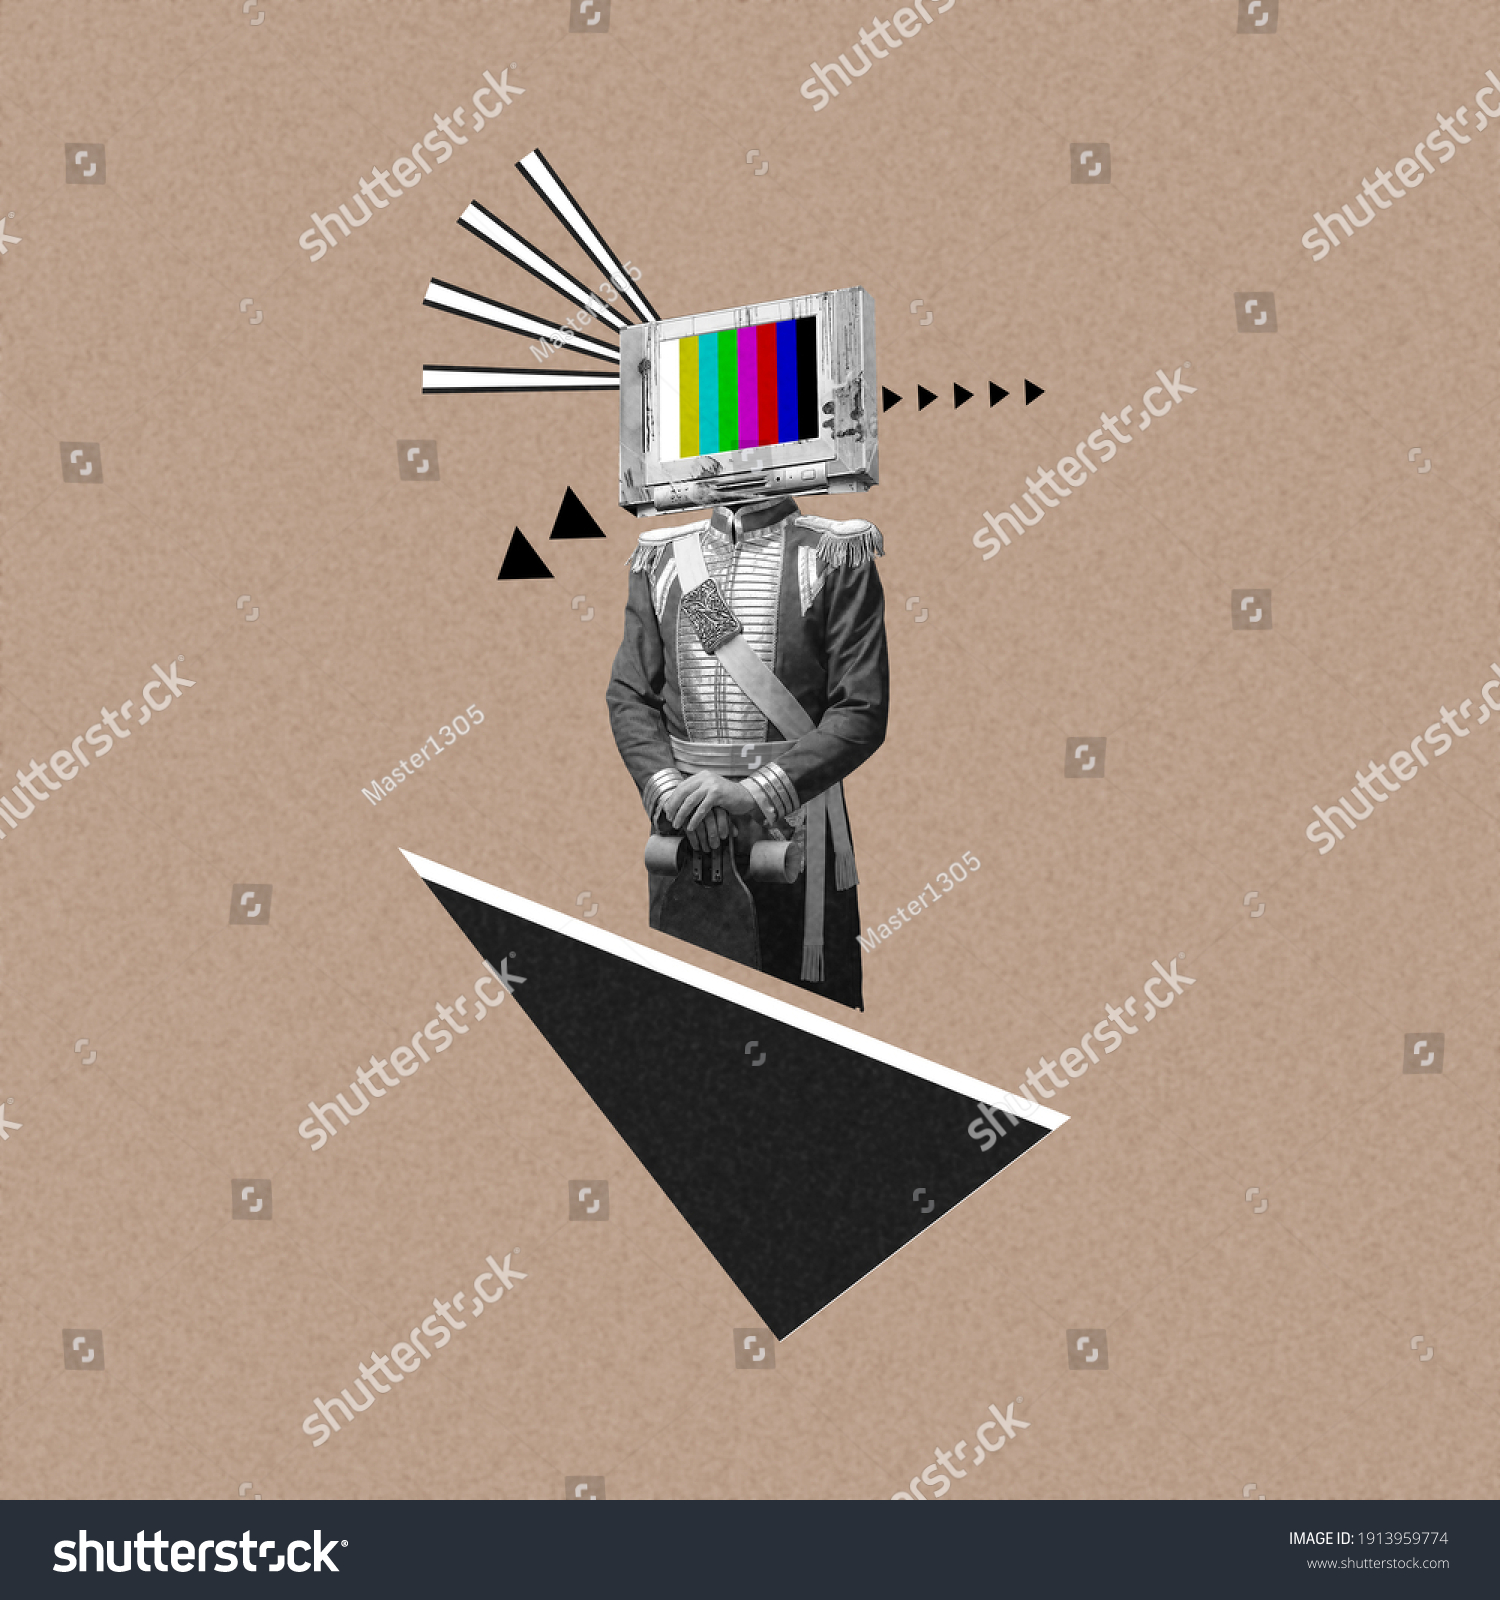 New ideas. Renaissanse man headed by old TV isolated on background. Negative space to insert your text. Modern design. Contemporary colorful and conceptual bright art collage, art collage. Visual art. #1913959774